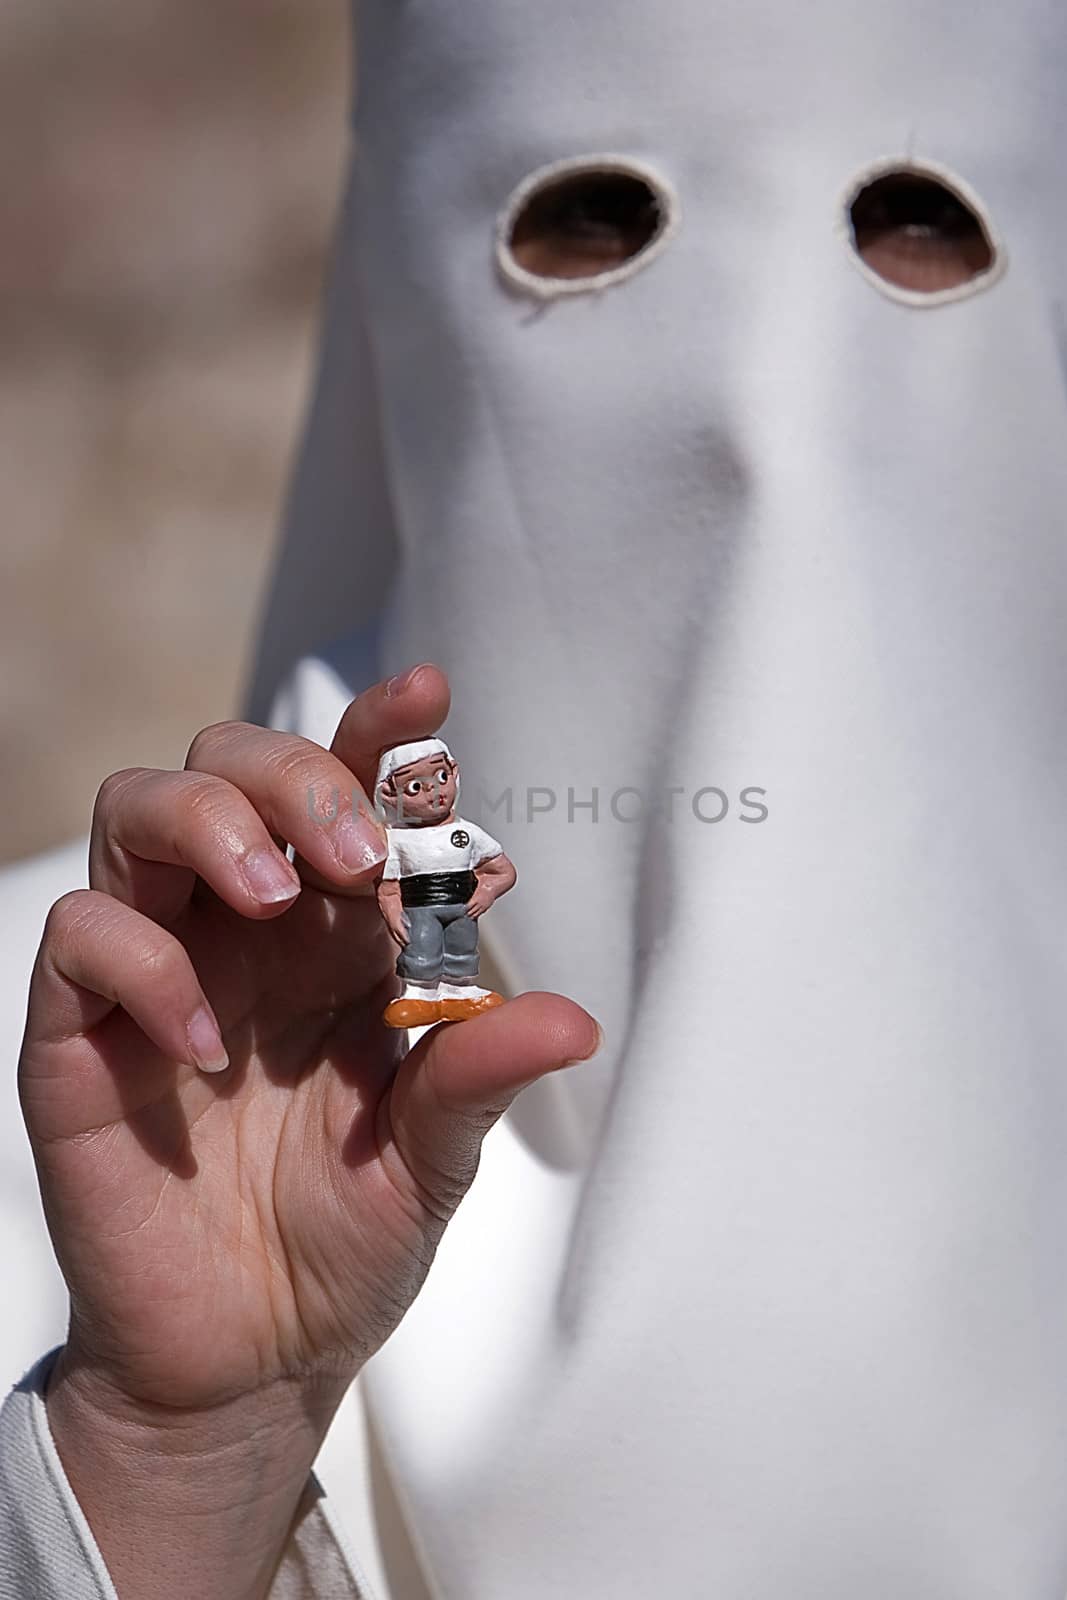 Penitent with a costalero figurine in his hand during Holy Week, Spain